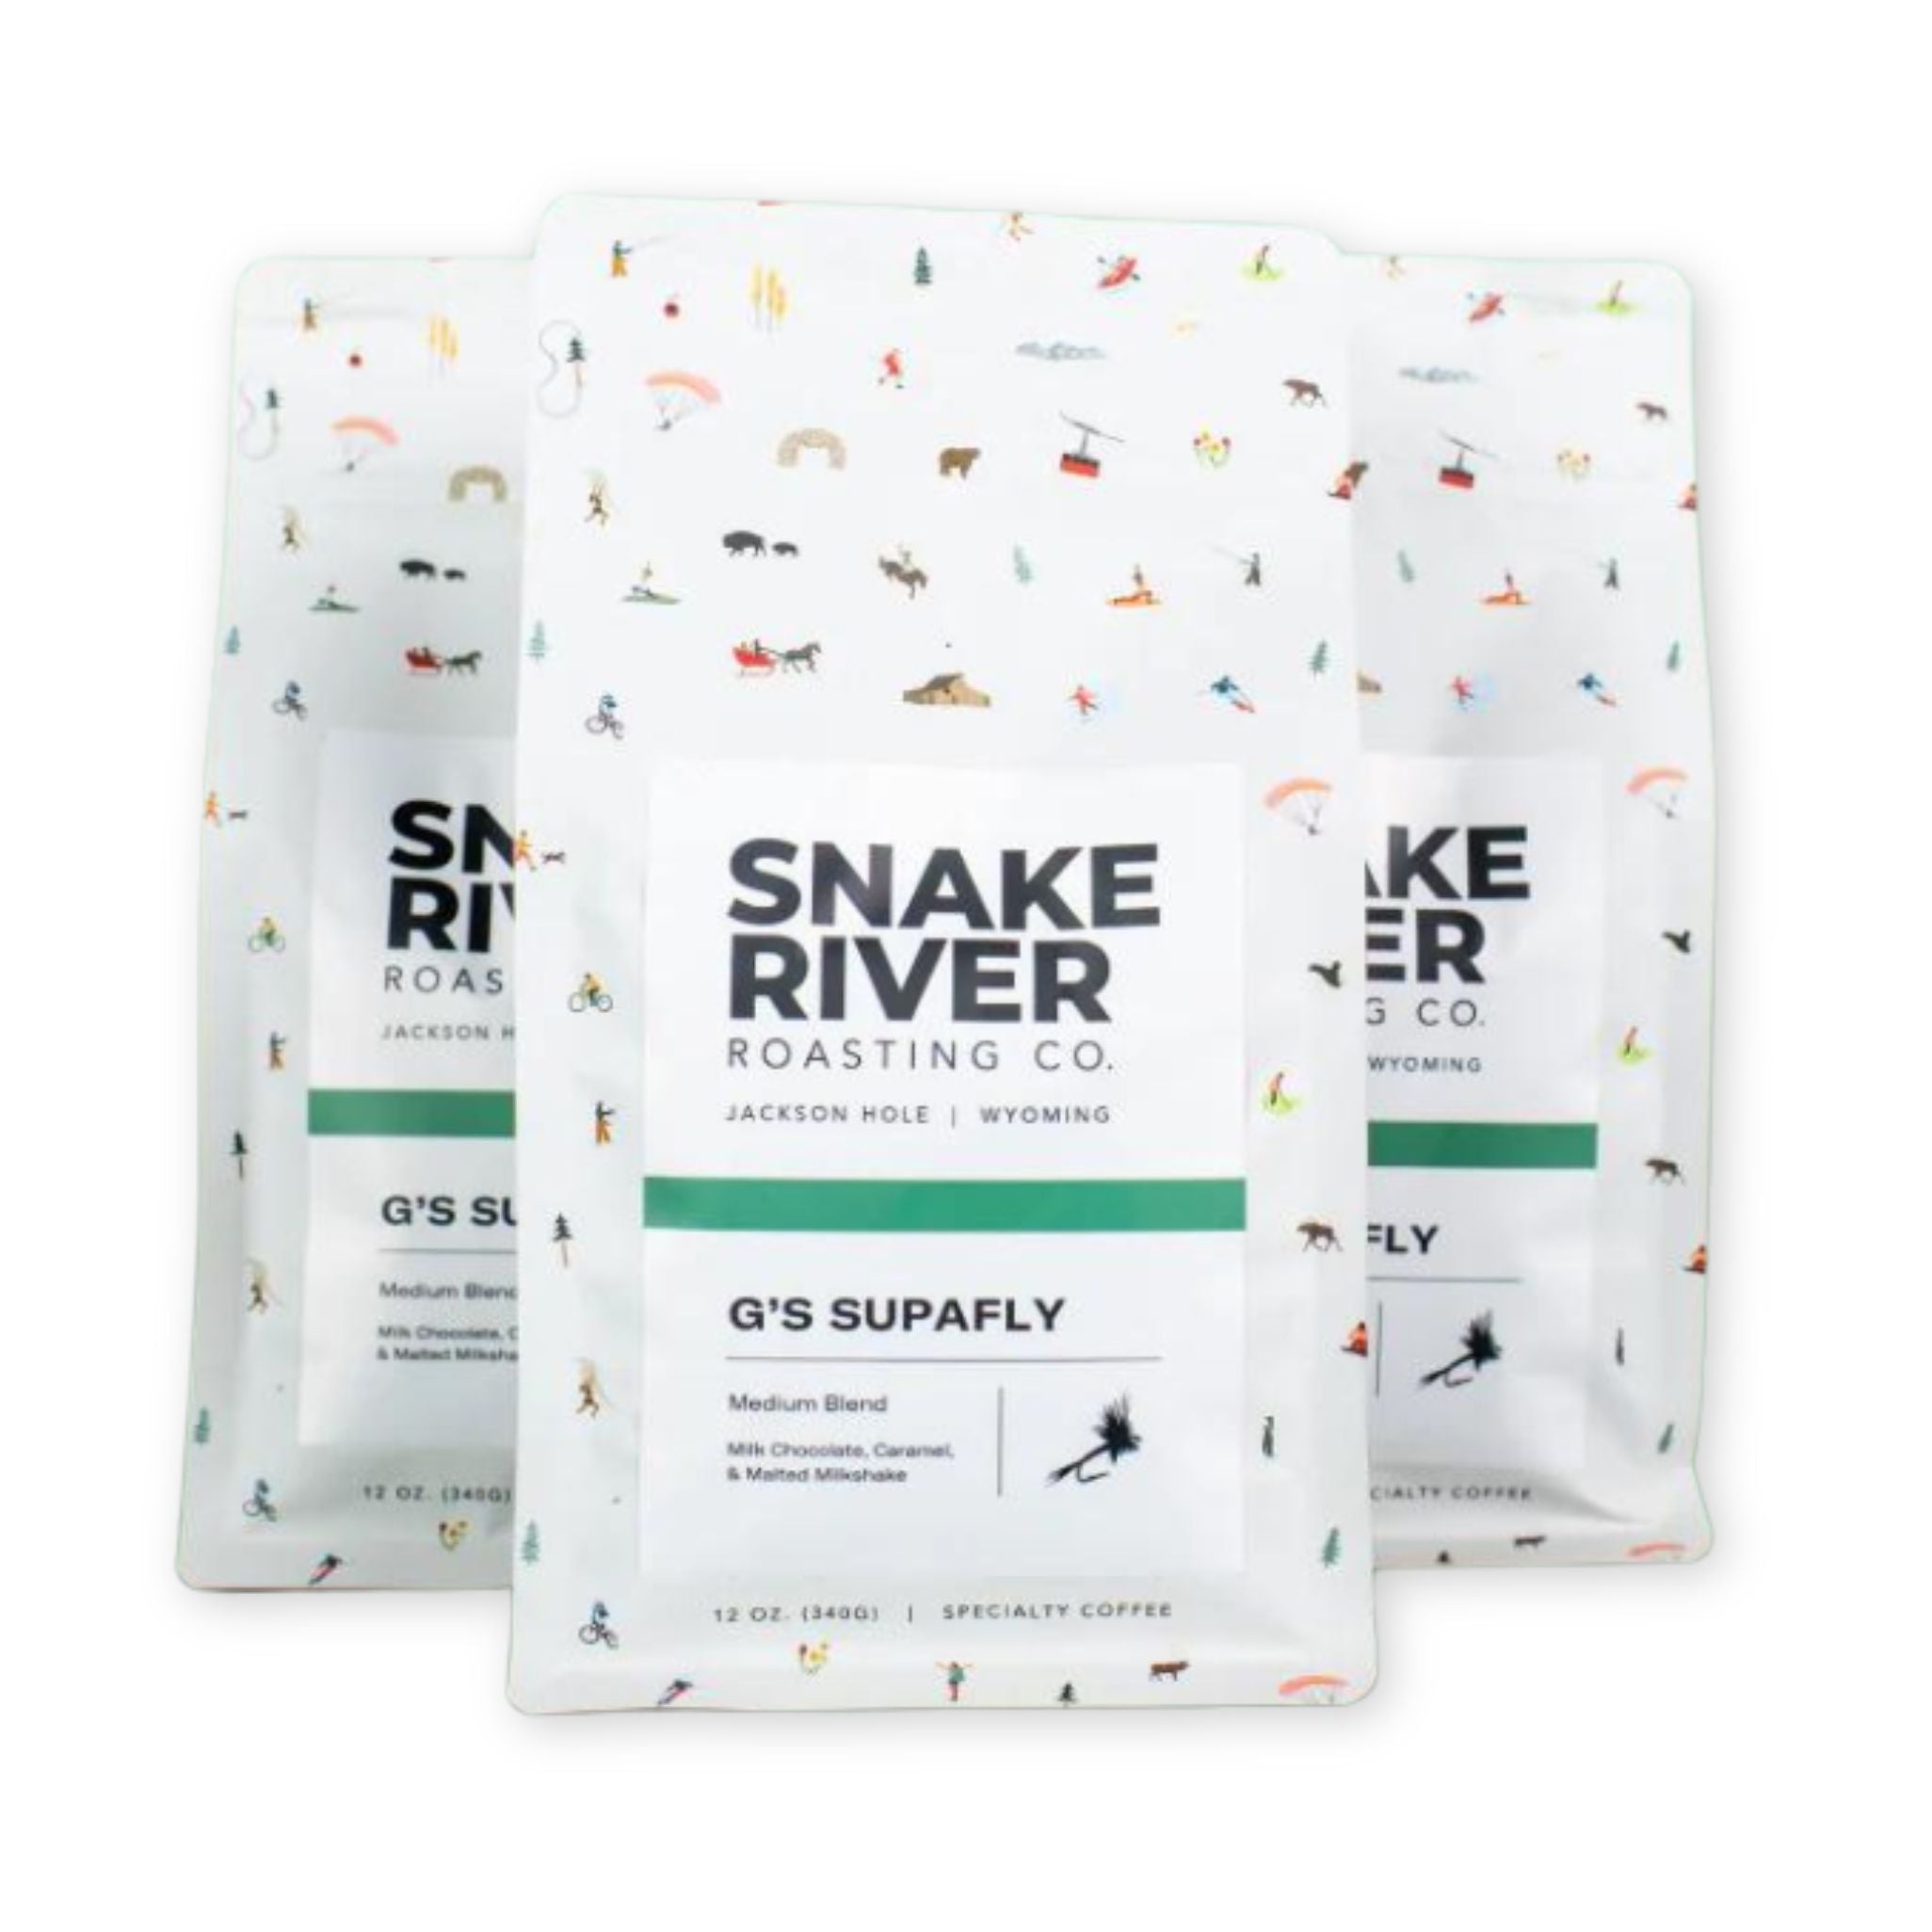 Group of coffee bags from Snake River Roasting